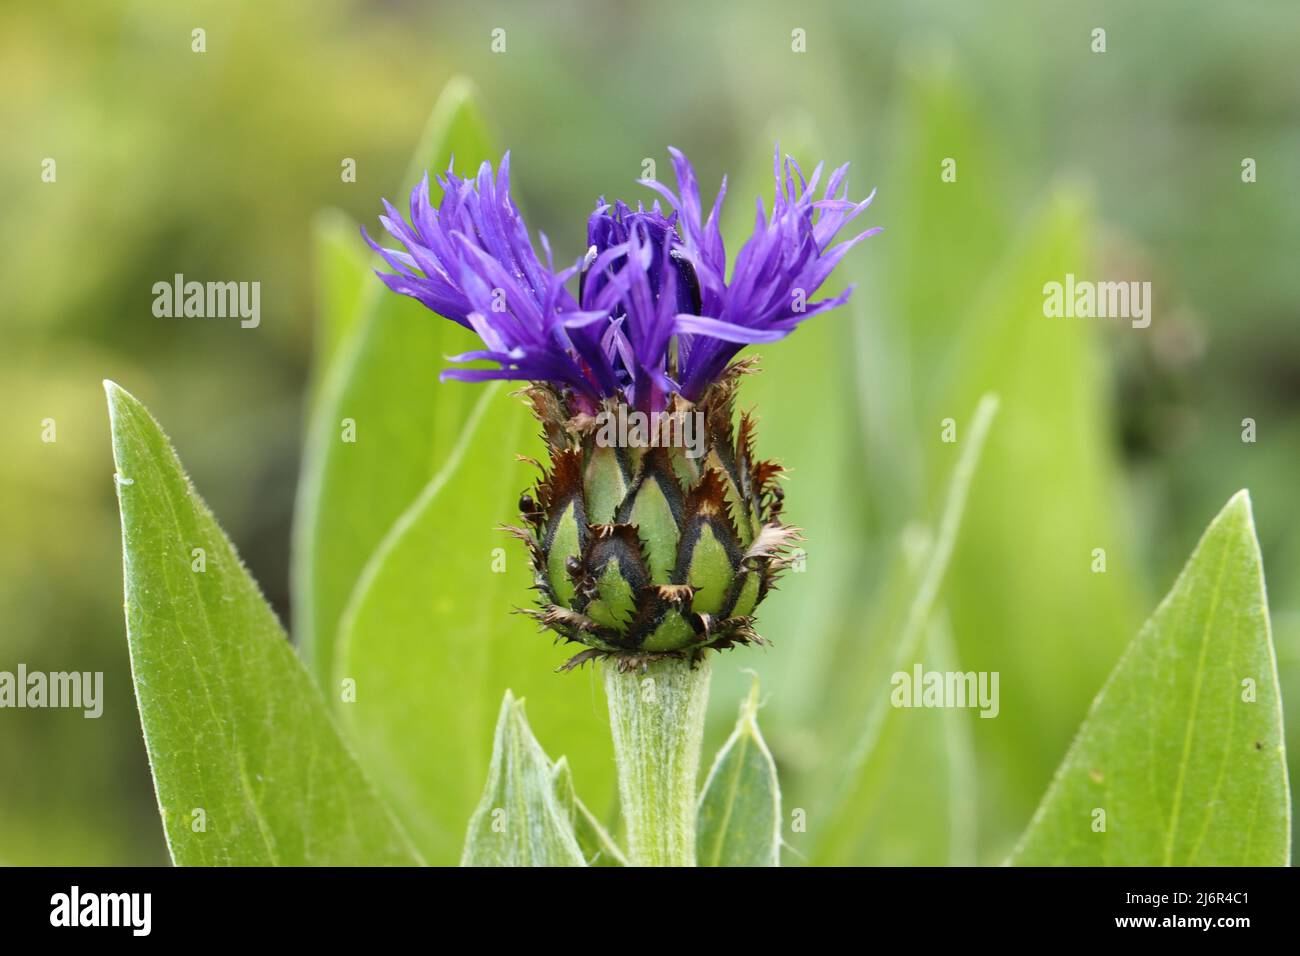 close-up of a single opening flower of a beautiful blue centaurea montana against a green blurred background Stock Photo